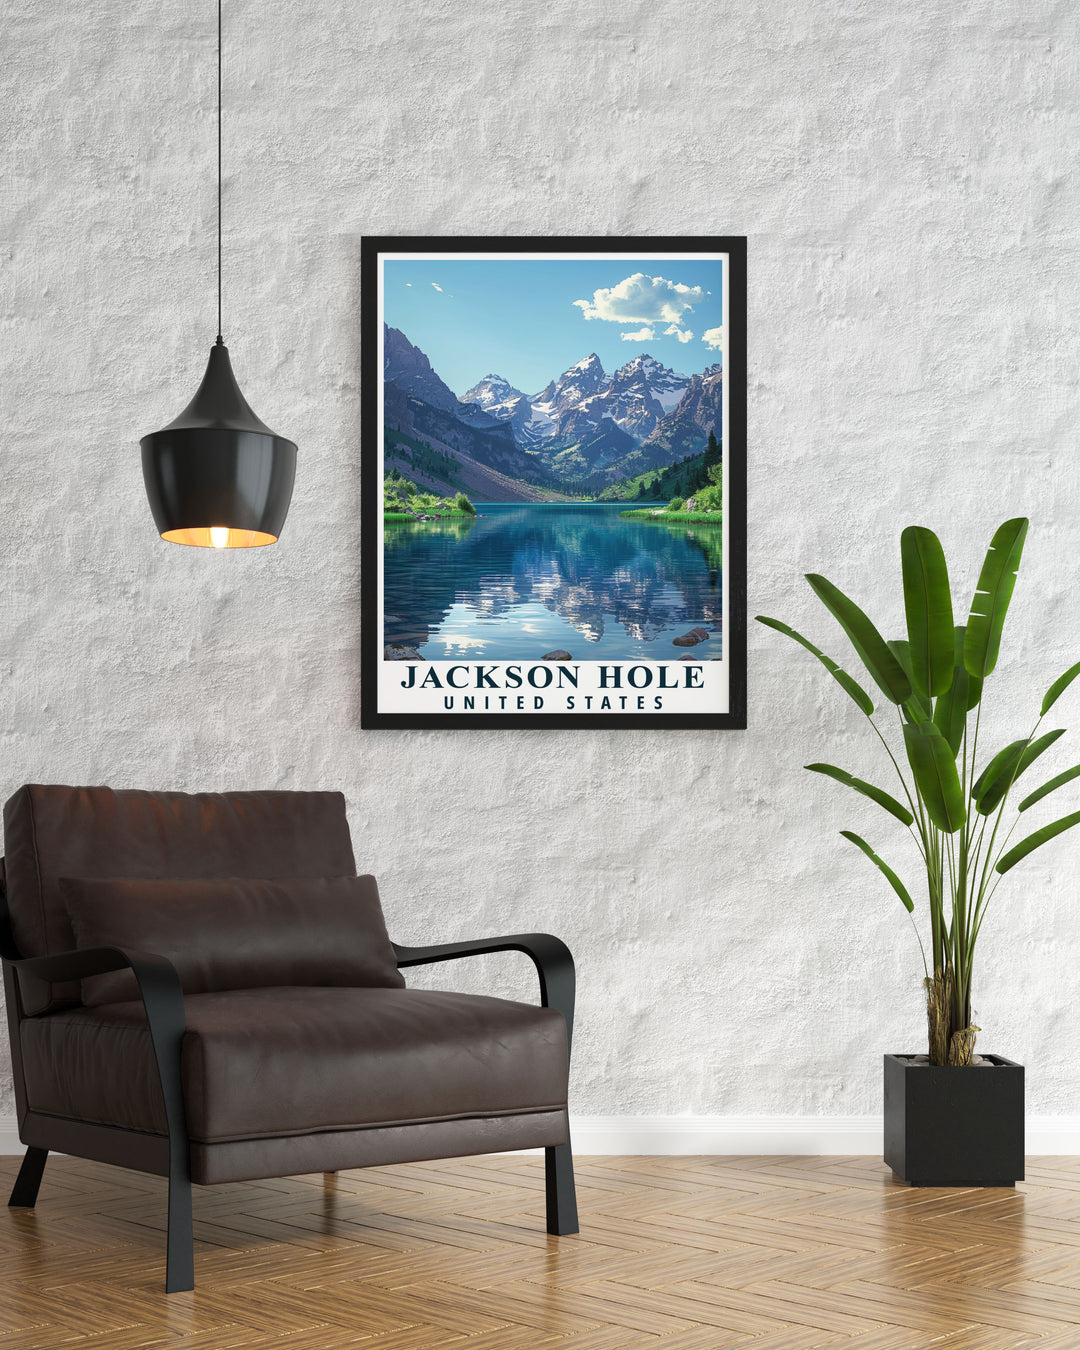 Featuring Jackson Holes dynamic landscape and the stunning Grand Teton, this art print captures the essence of Wyomings outdoor splendor.